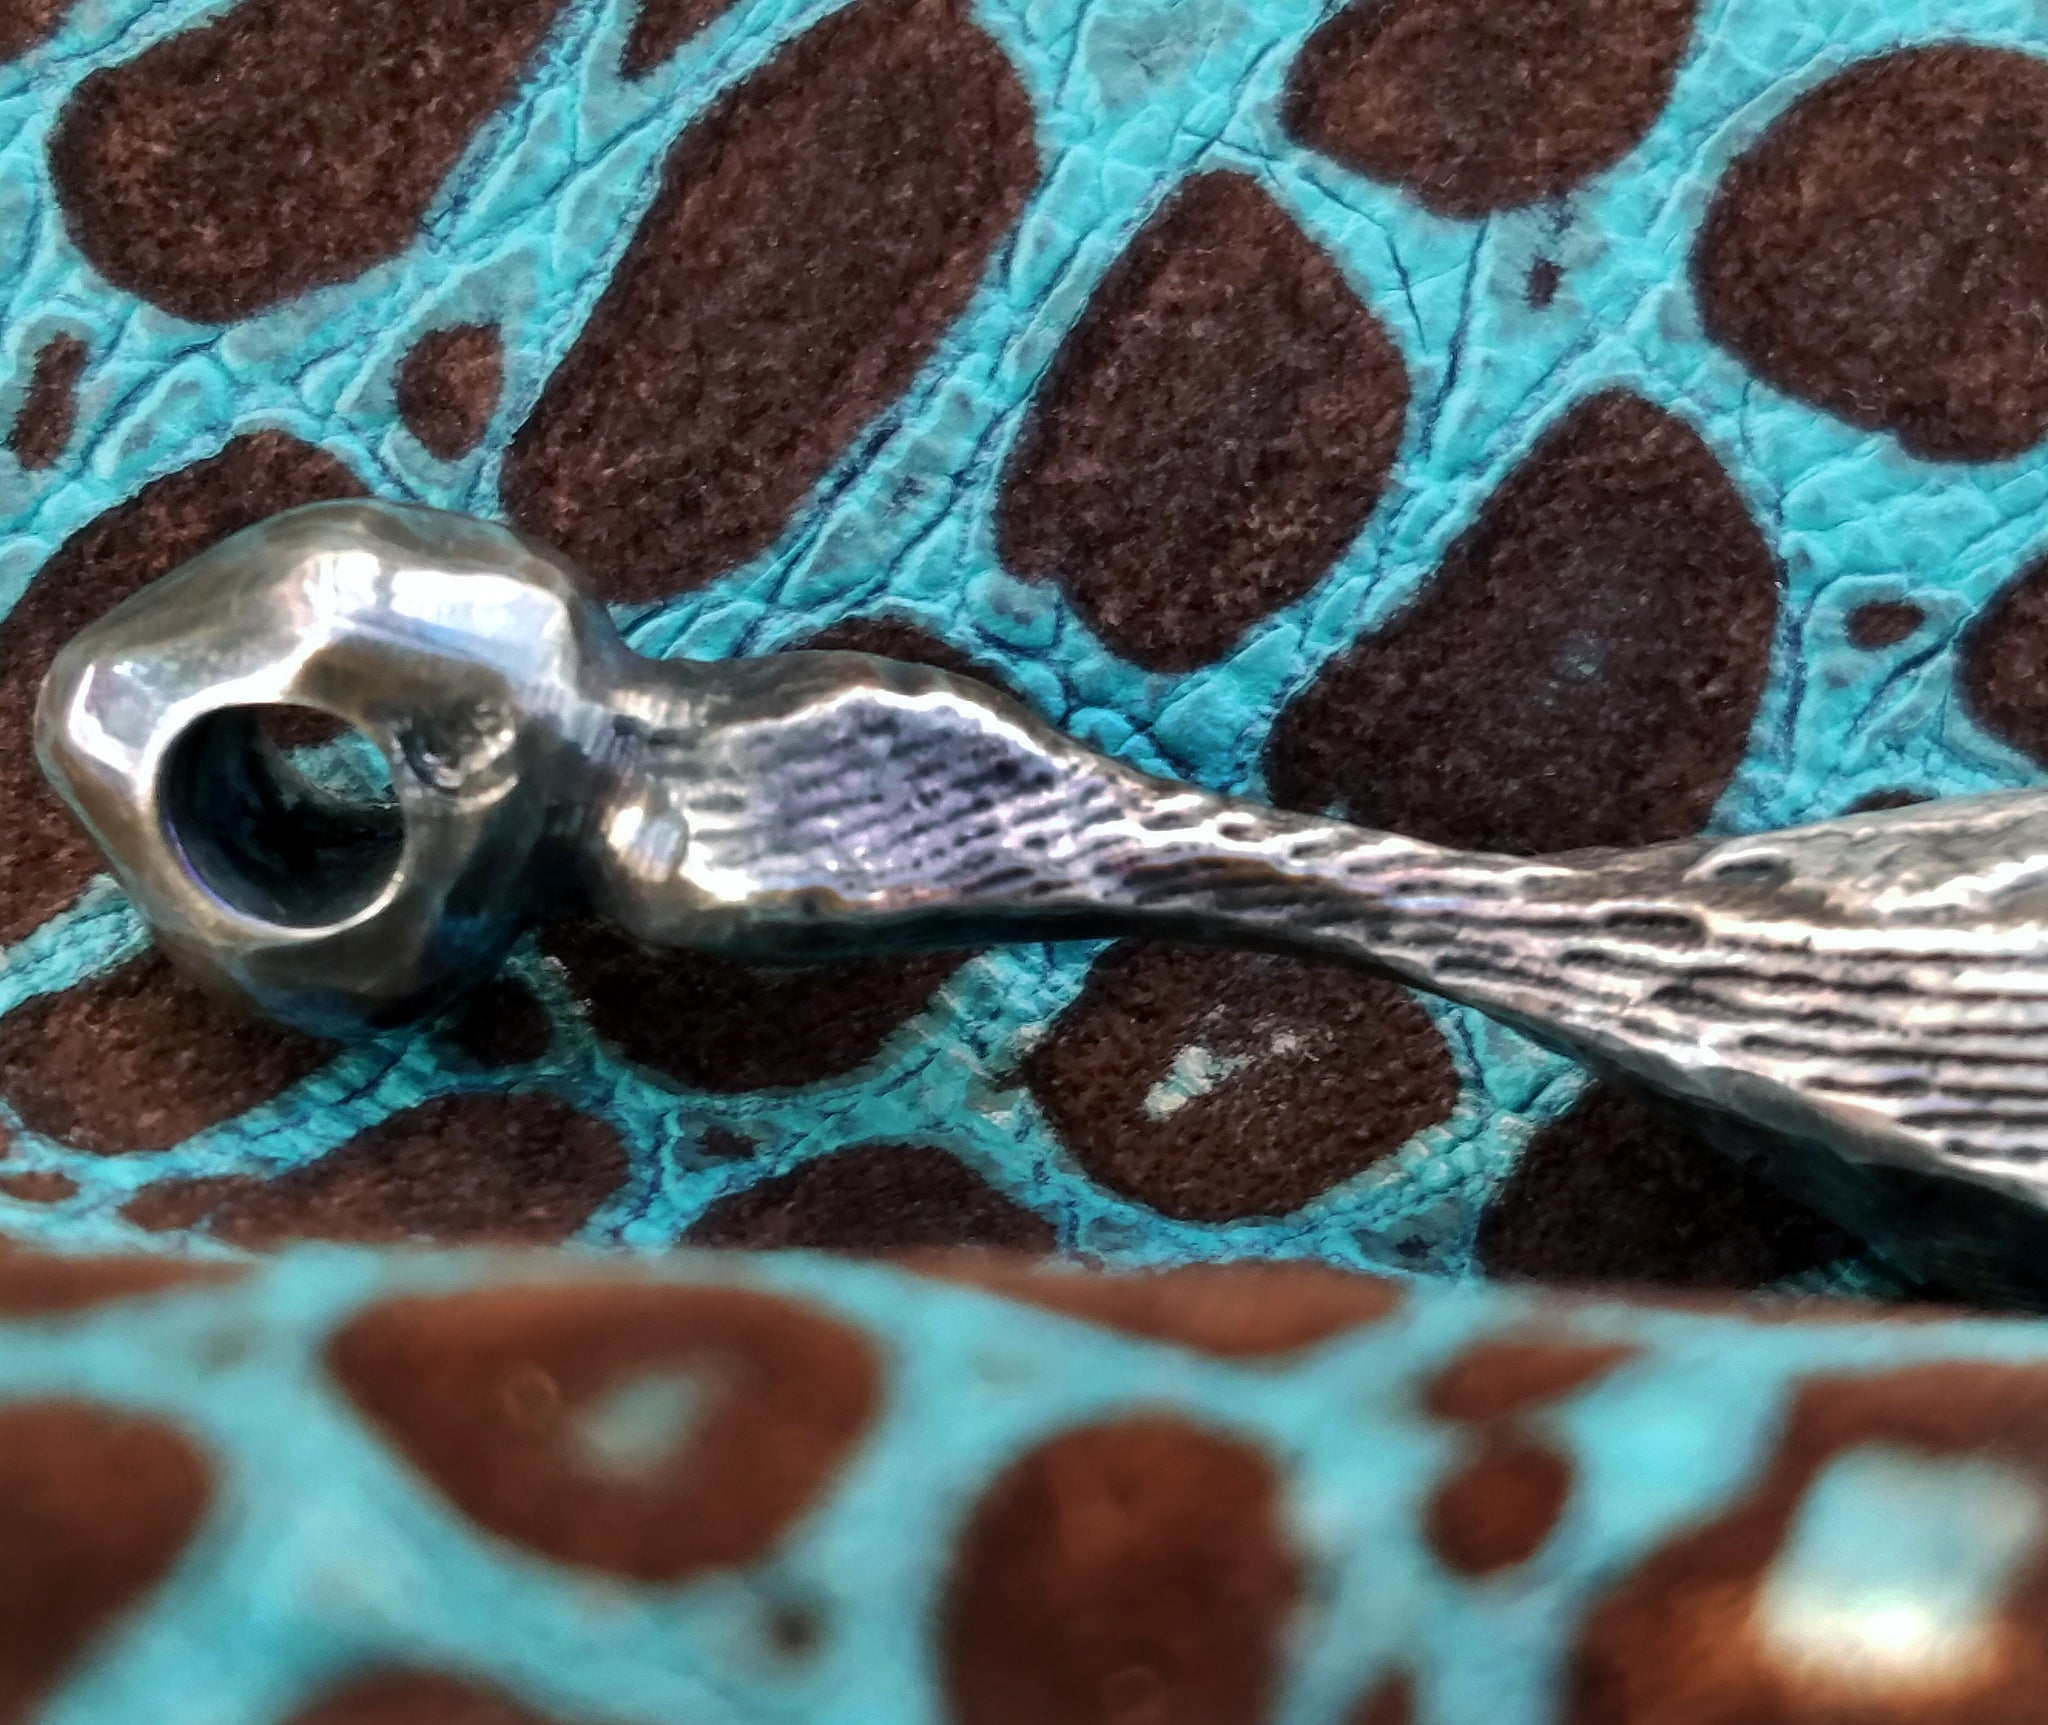 'Droplet' Hand-carved Hand-poured Cuttlefish Pendant #1 by Phantom